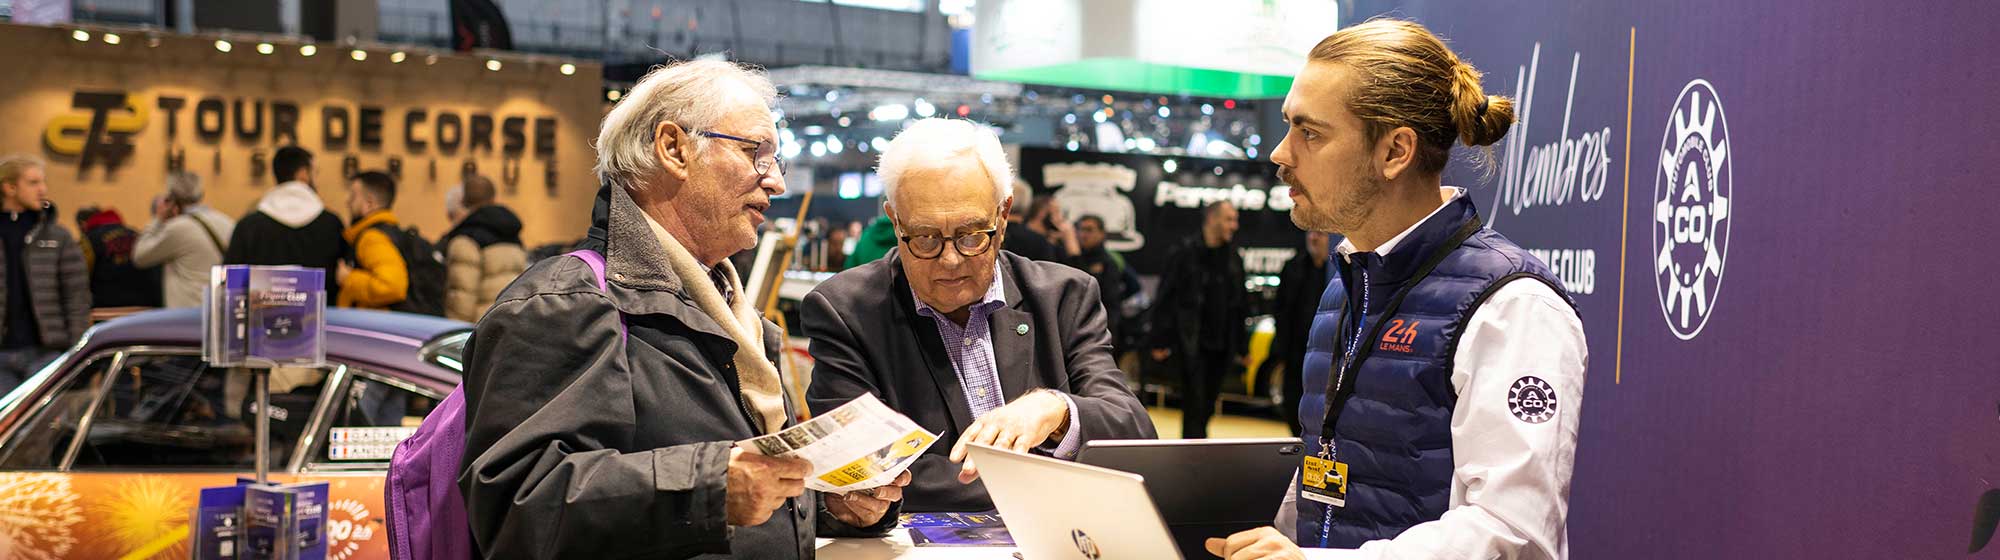 Picture of an exhibitor at Retromobile talking to two visitors on his stand